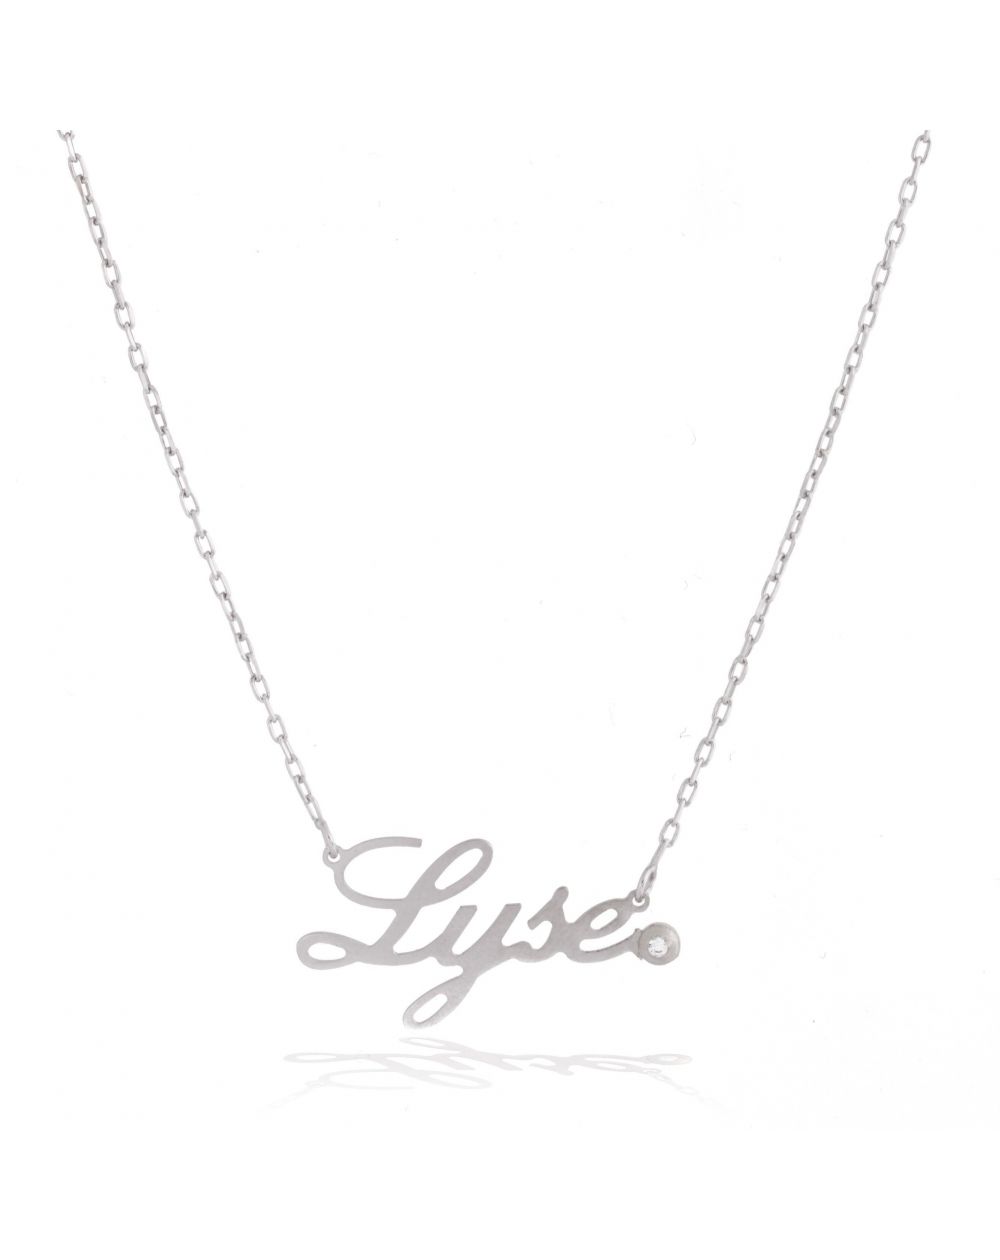 Name necklace with silver stone